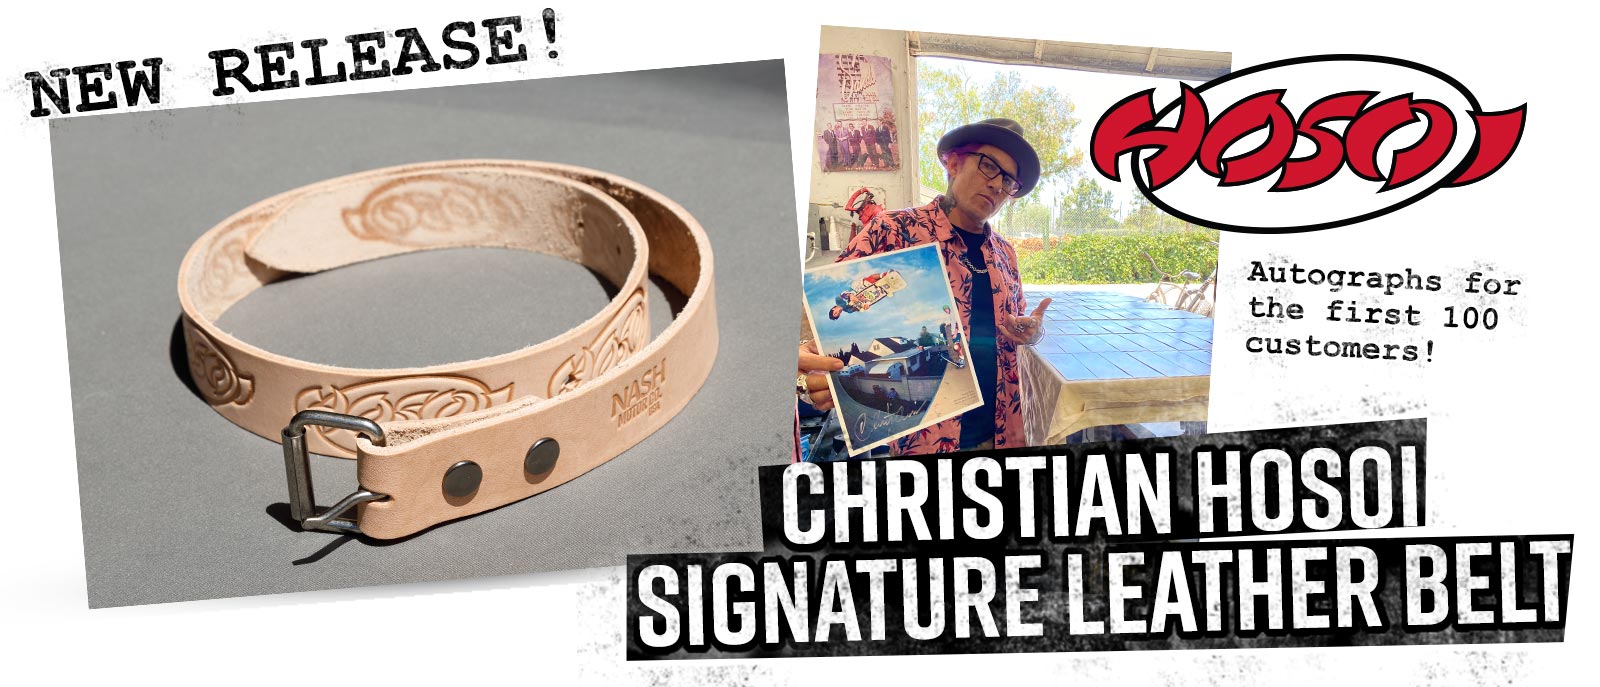 The Christian Hosoi Signature Leather Belt by Nash Motorcycle Co.